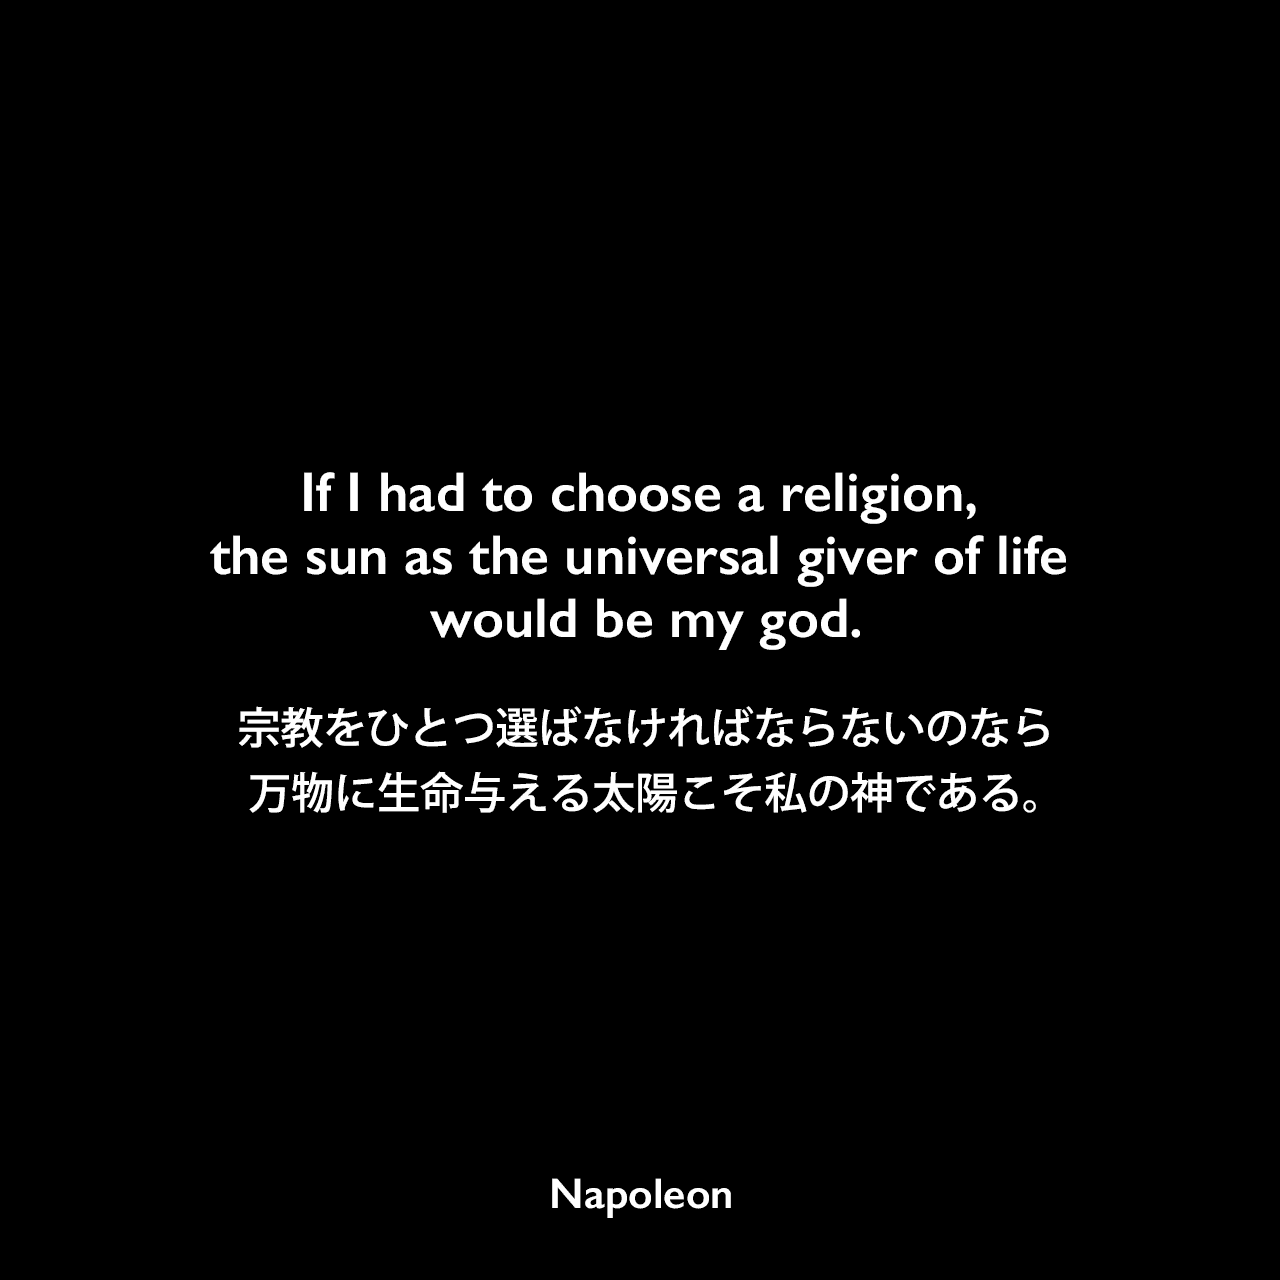 If I had to choose a religion, the sun as the universal giver of life would be my god.宗教をひとつ選ばなければならないのなら、万物に生命与える太陽こそ私の神である。Napoleon